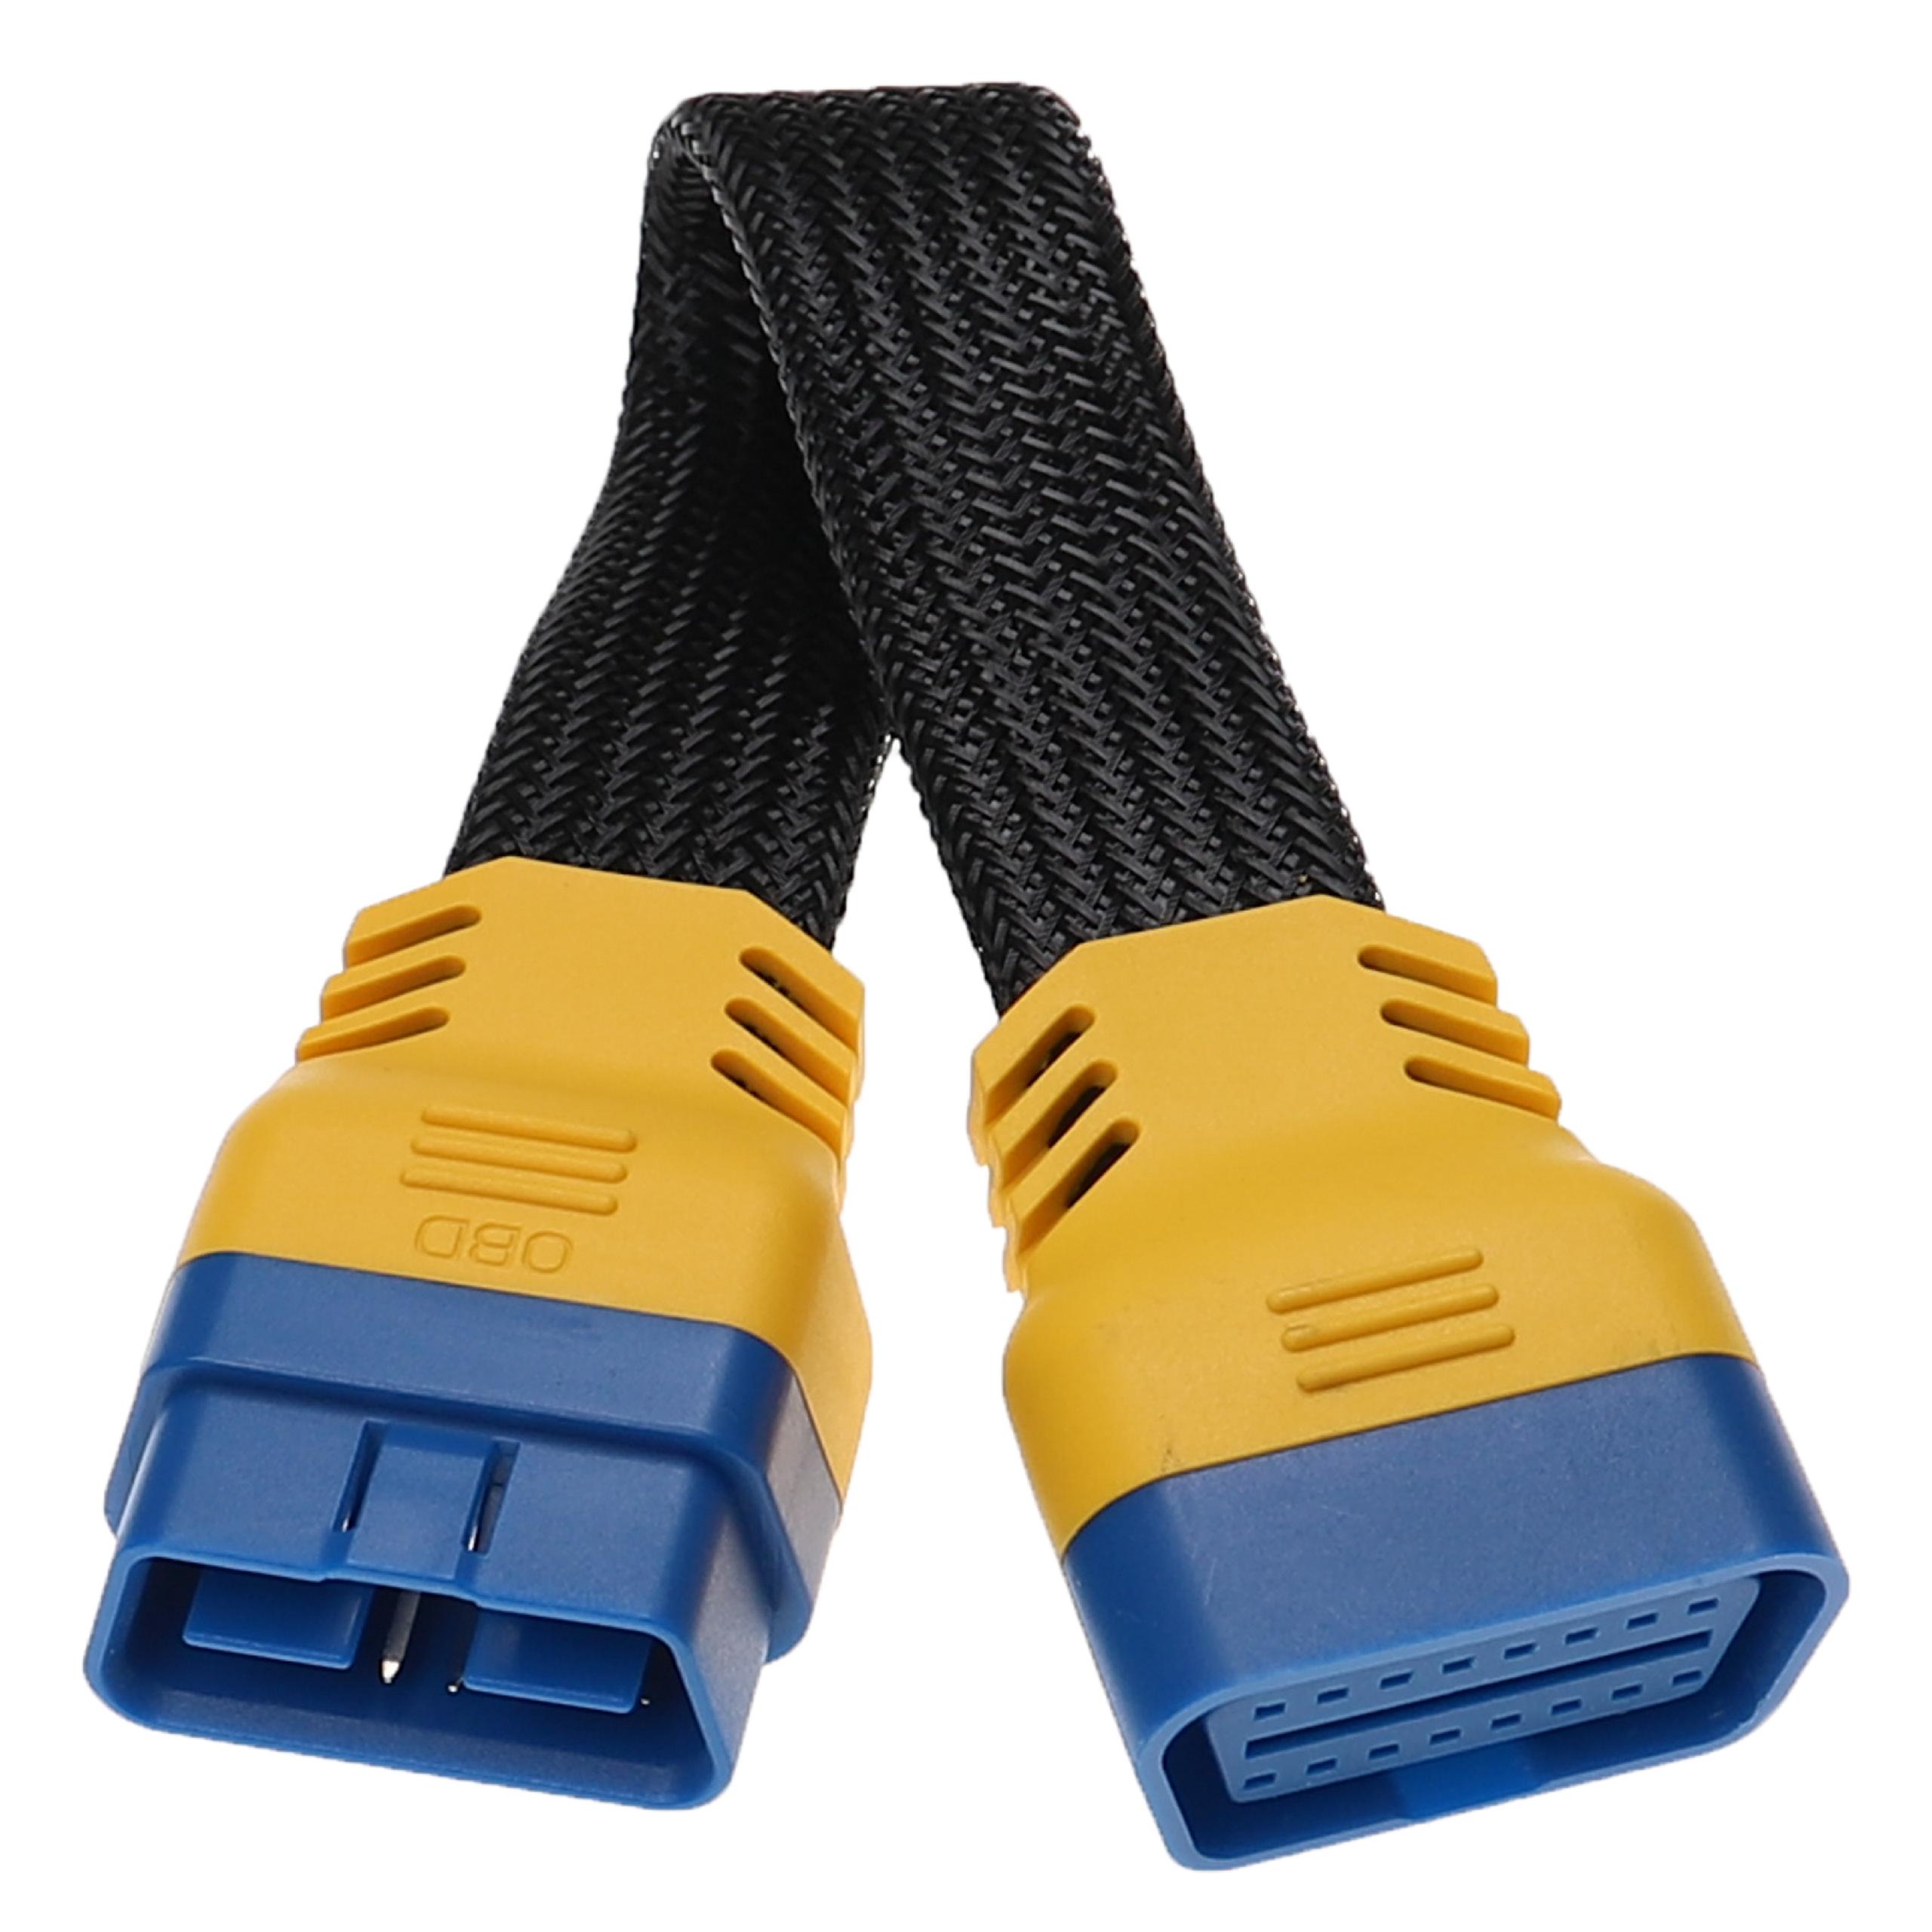 vhbw OBD2 Extension Cable 16 Pin (f) to 16 Pin (m) for LKW, Car, Vehicle - 30 cm